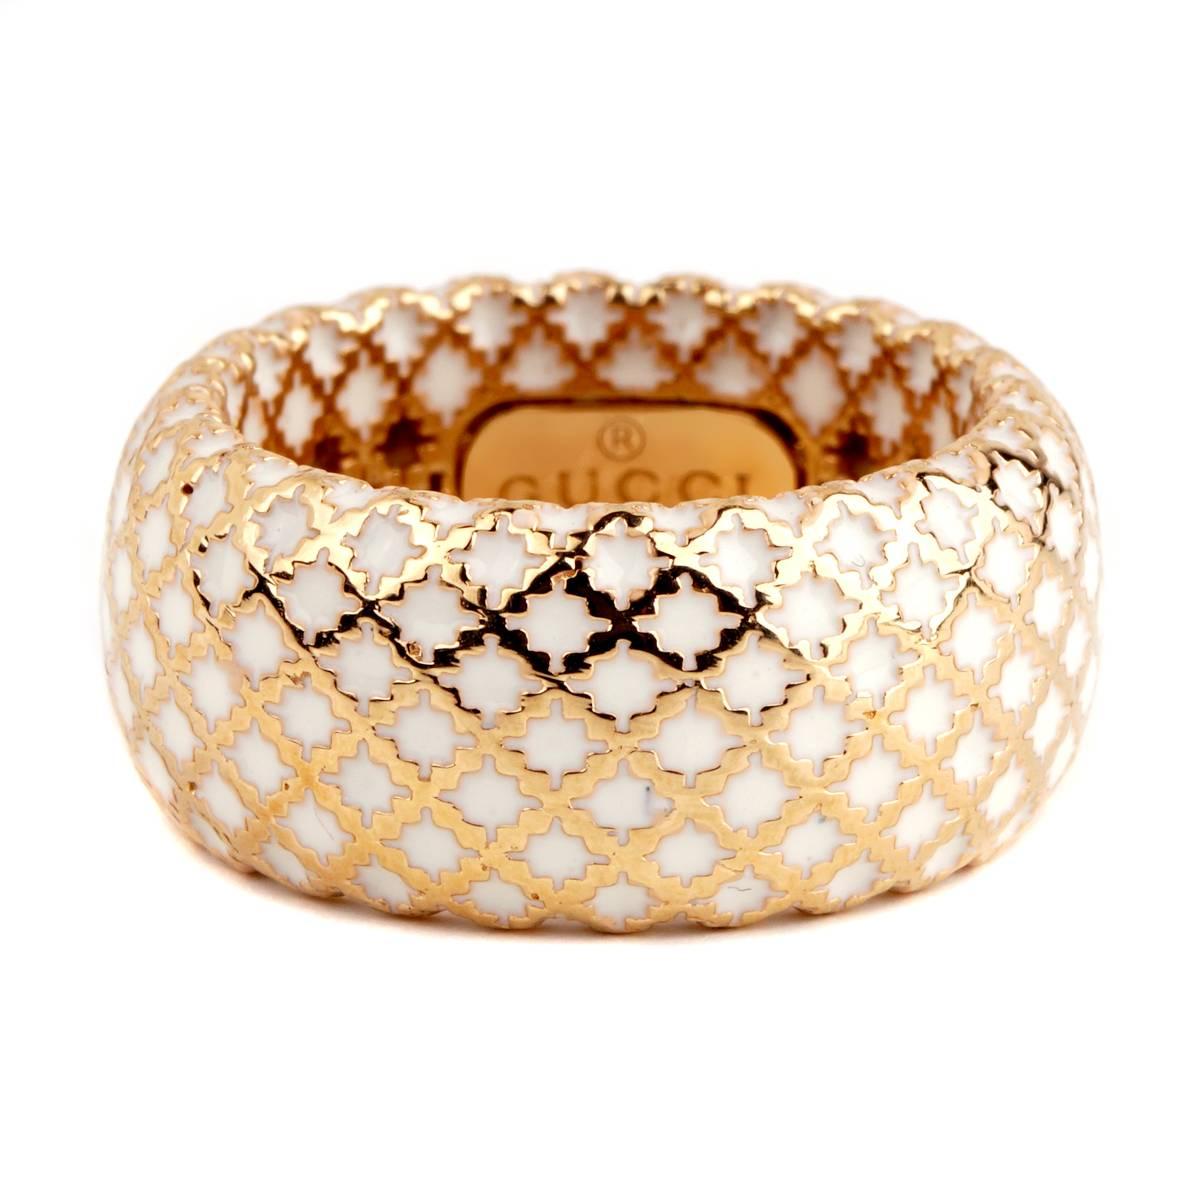 A fabulous Gucci ring part of the Diamantissima collection, featuring a crisscross pattern with white enamel expertly placed along the inside. 

Size 6, 
Width .39